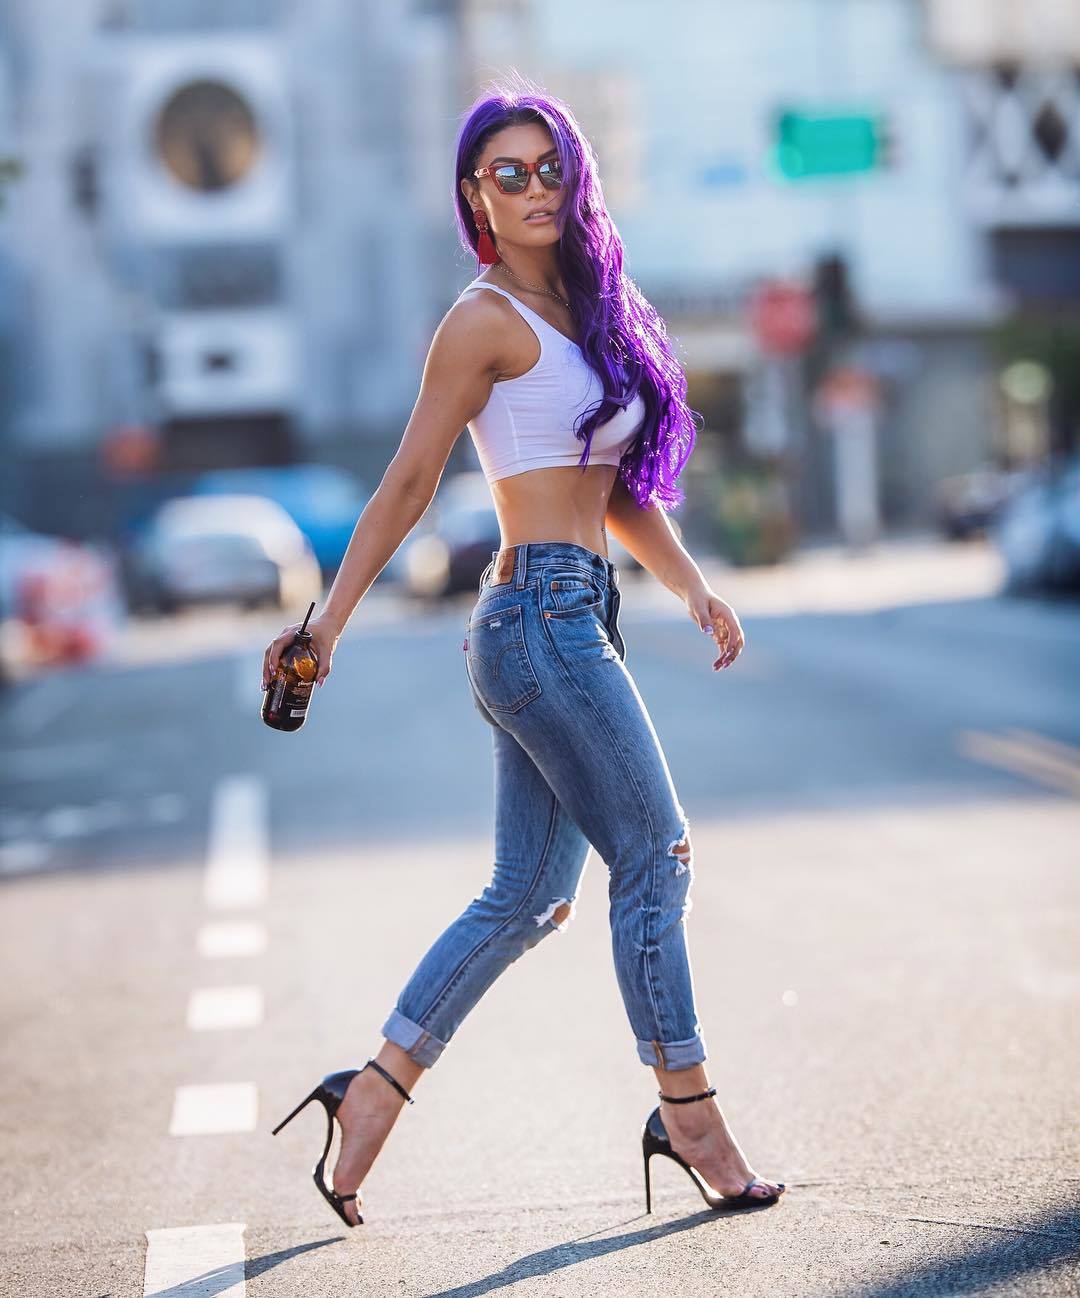 60+ Sexy Eva Marie Boobs Pictures Which Are Sure To Win Your Heart Over | Best Of Comic Books